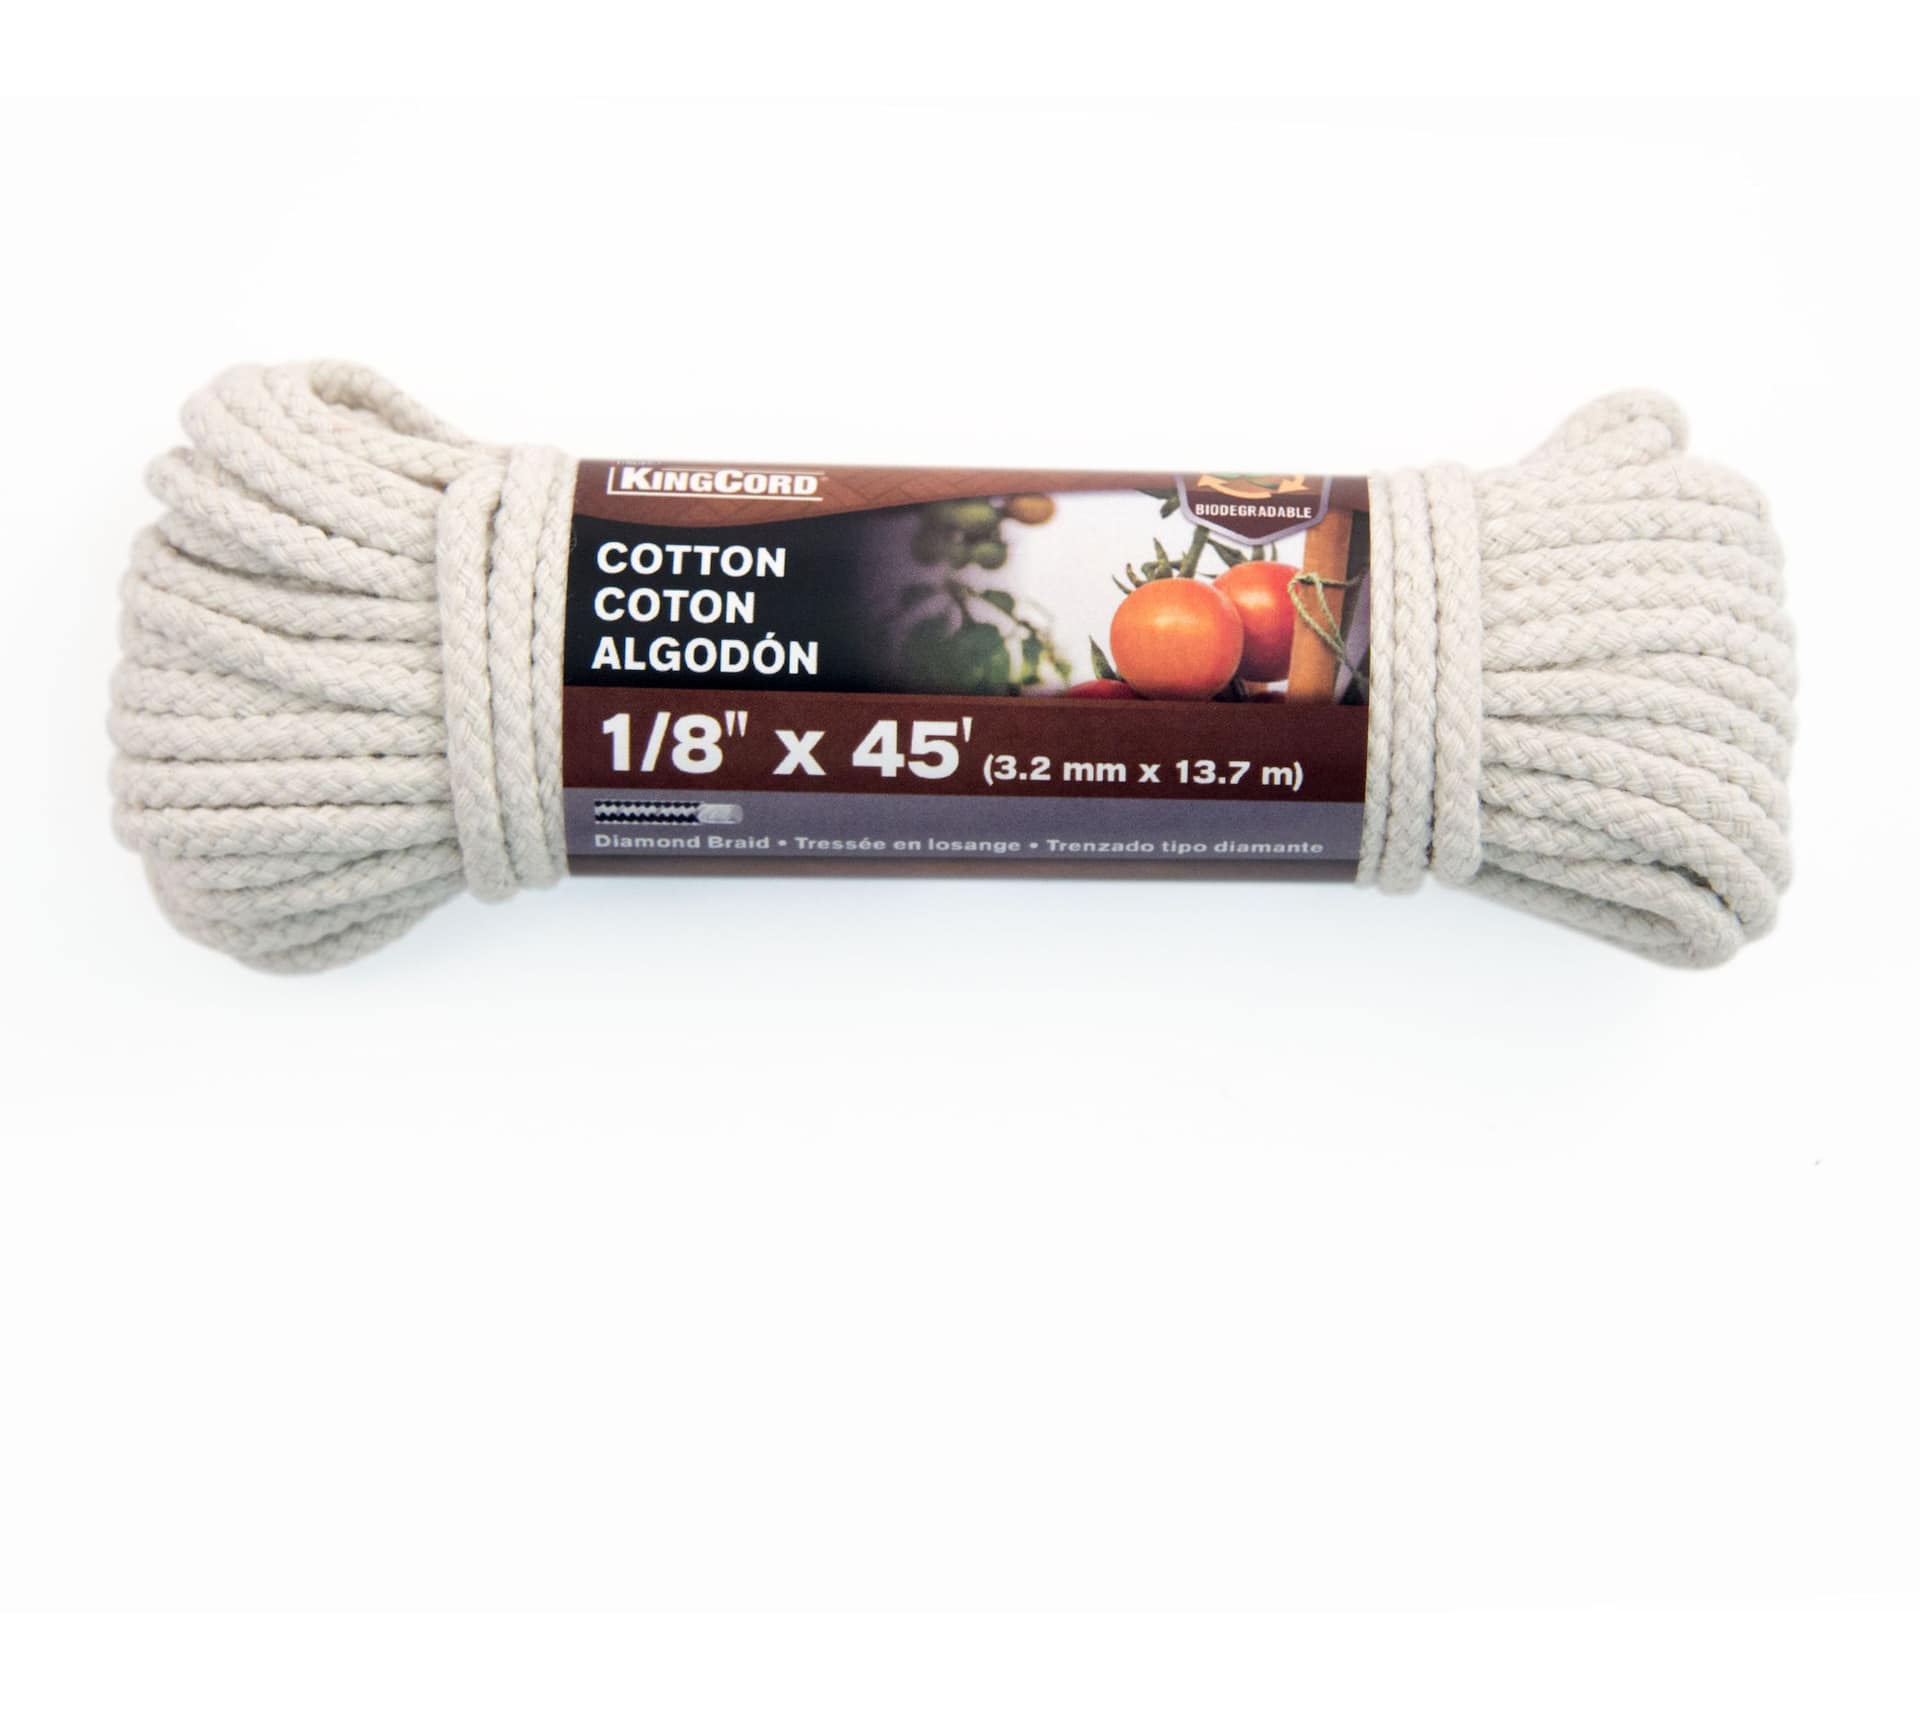 https://media-www.canadiantire.ca/product/fixing/hardware/general-hardware/0618561/cord-cotton-braid-1-8--78616ddd-01ef-4121-a425-13c4cc21df2d-jpgrendition.jpg